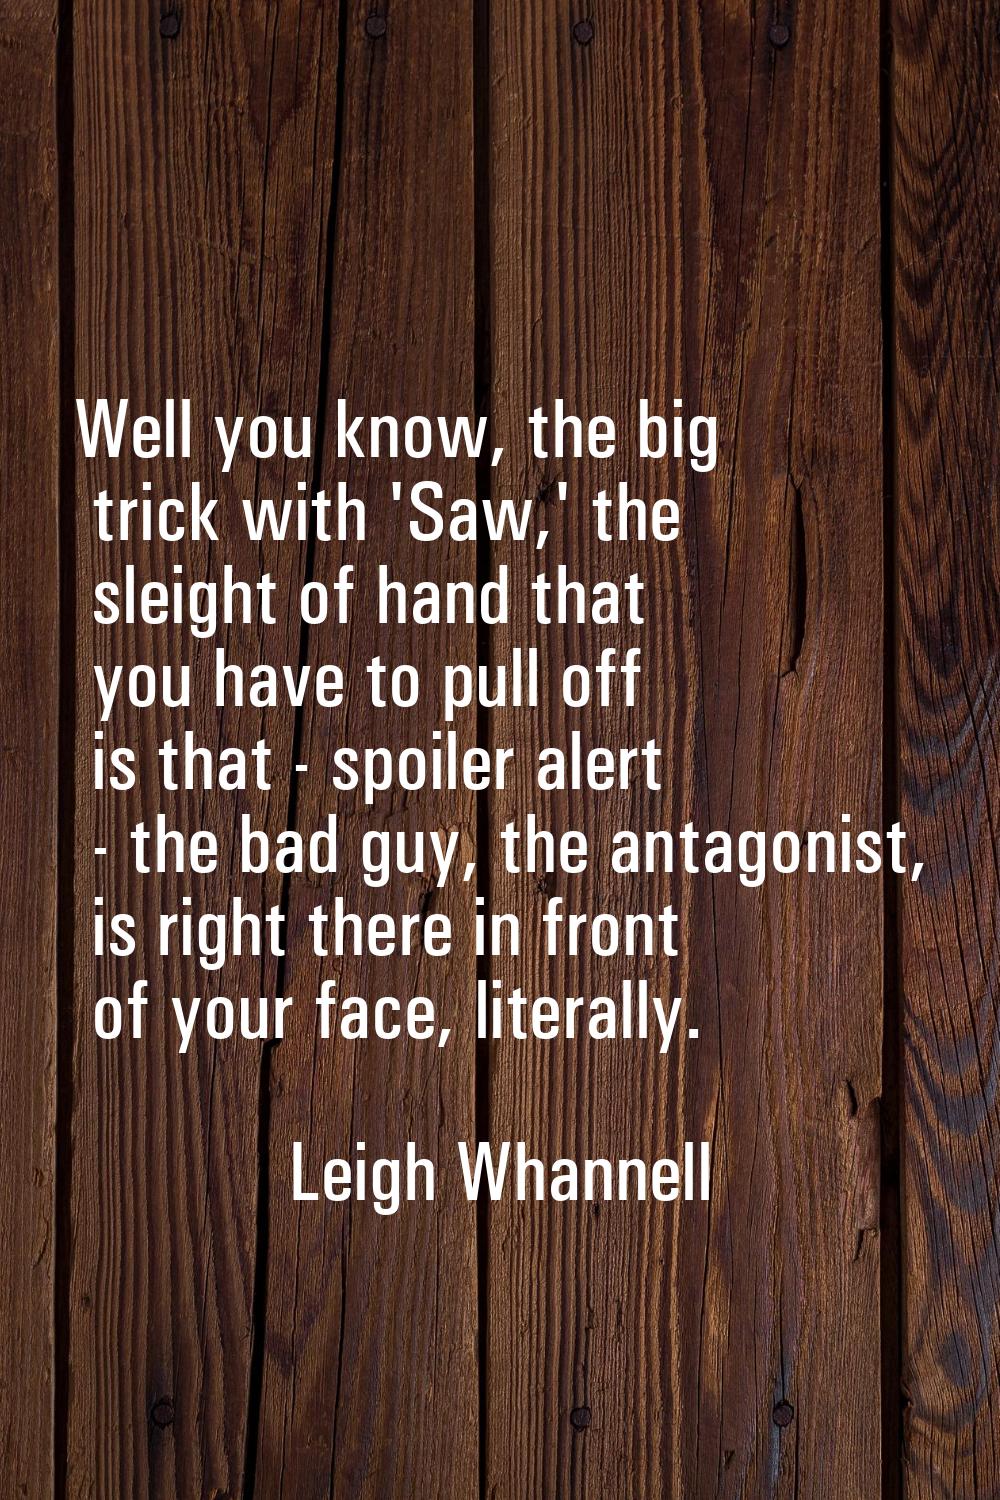 Well you know, the big trick with 'Saw,' the sleight of hand that you have to pull off is that - sp